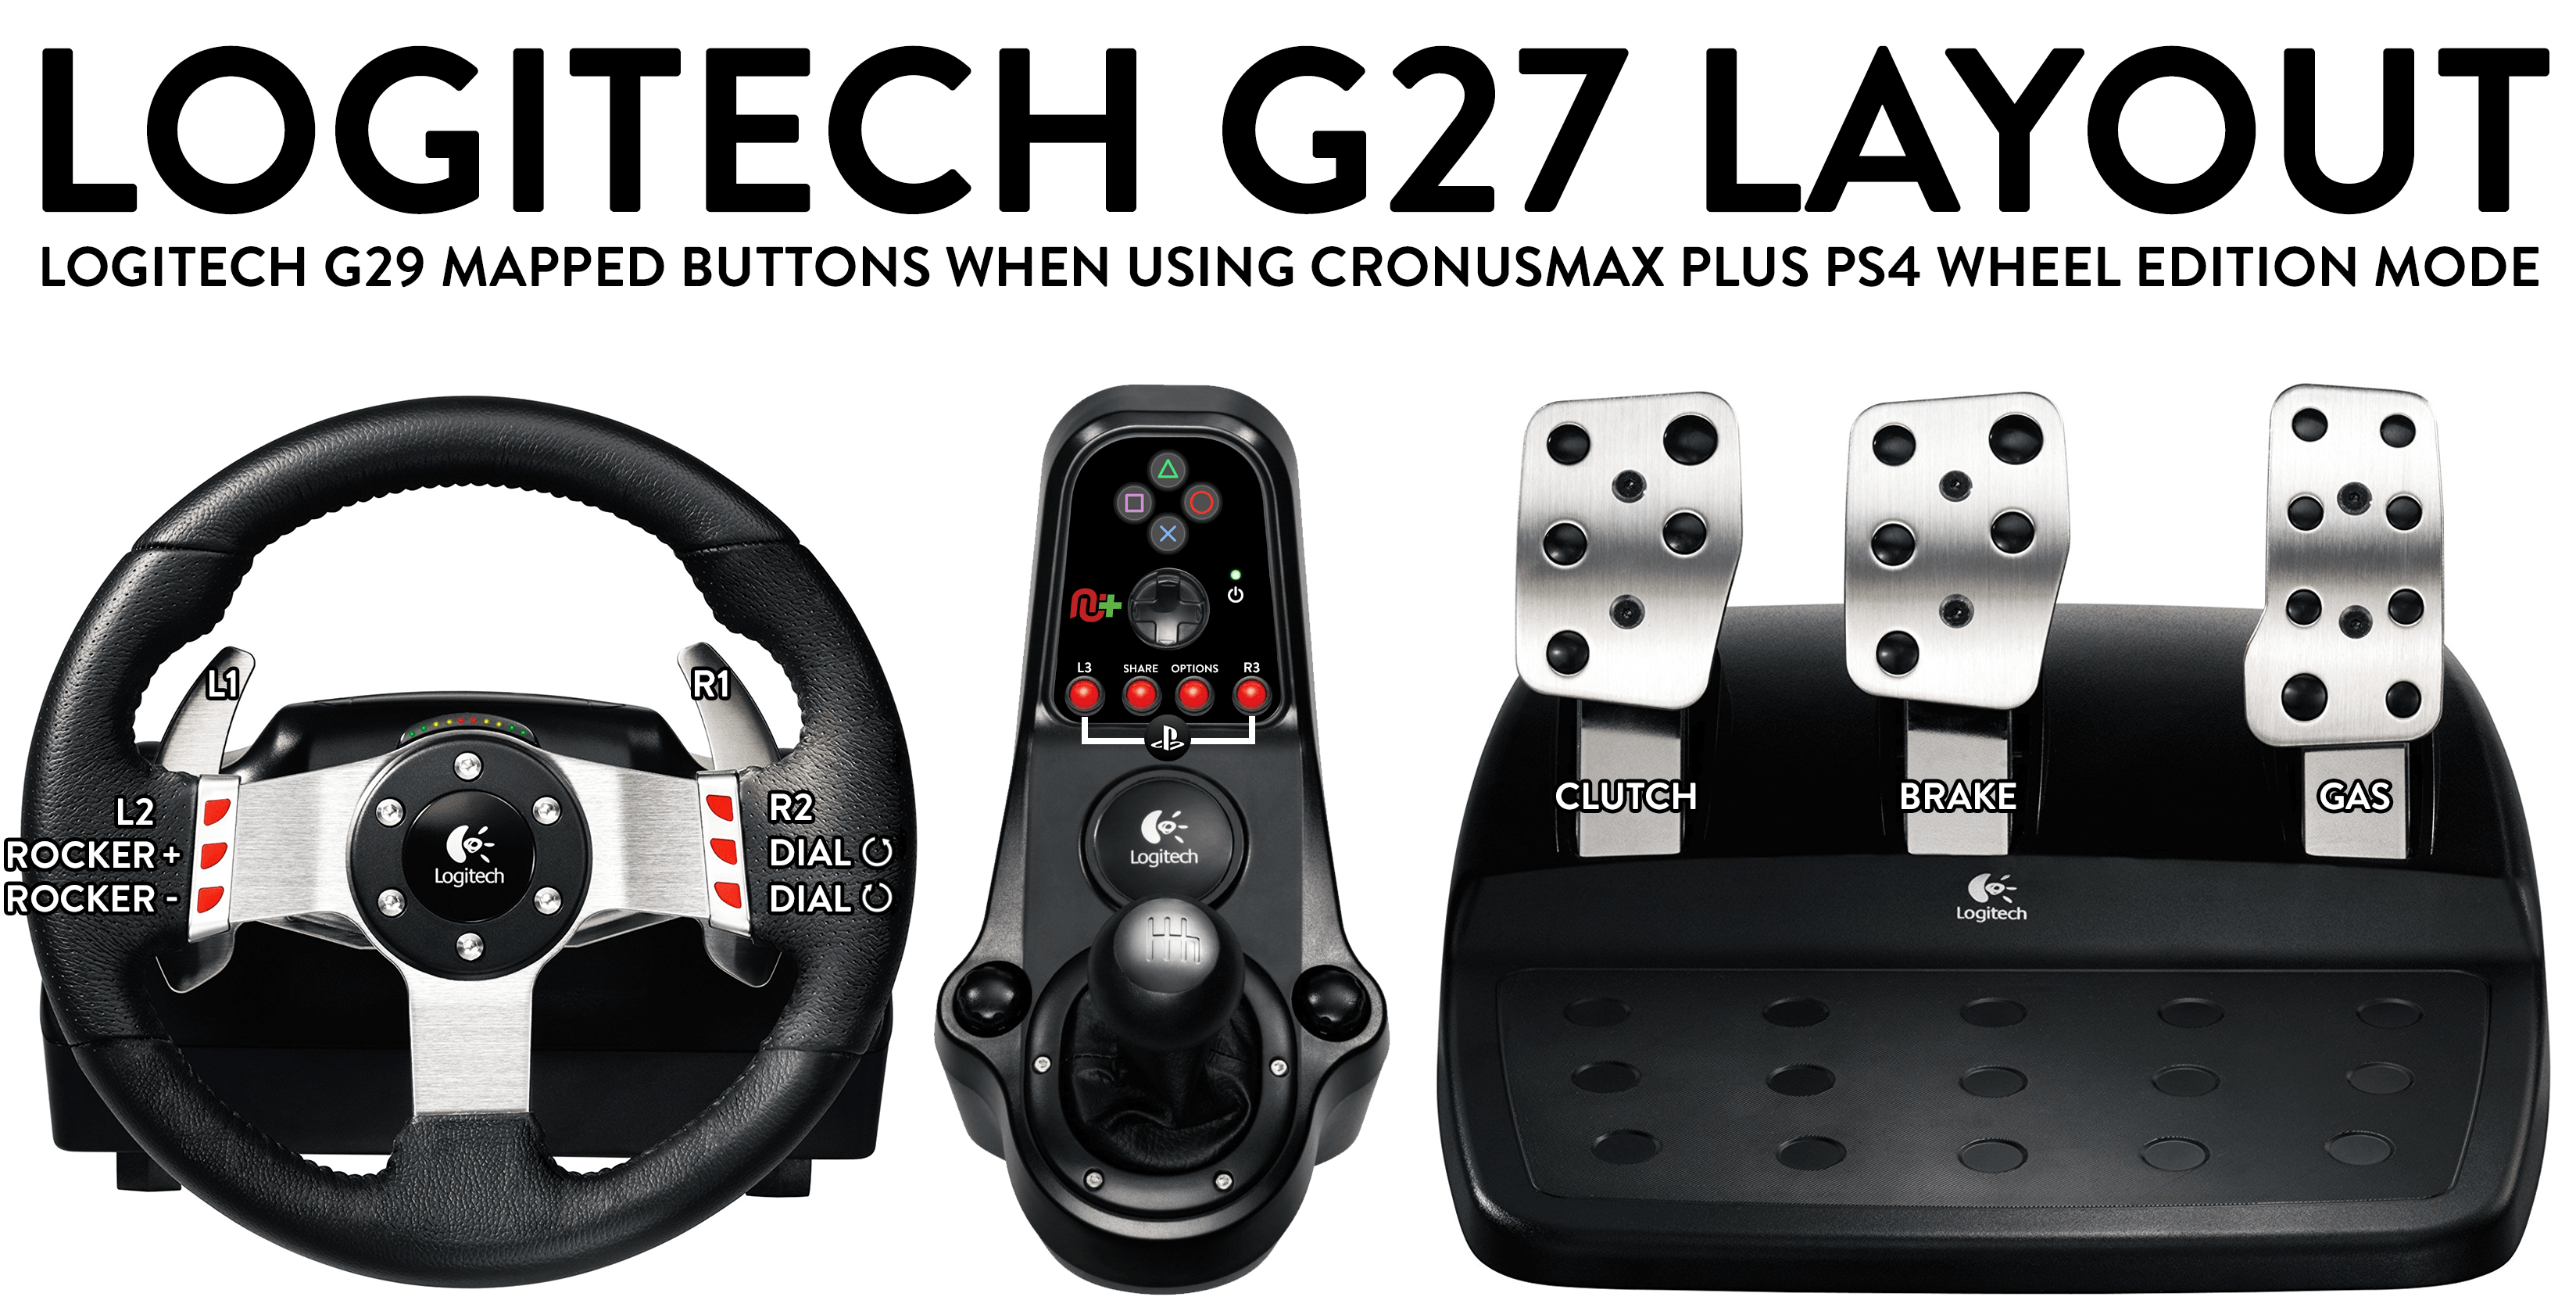 Logitech G27 Wheel on PS4 saved by CronusMax Plus adapter - Operation Sports Forums